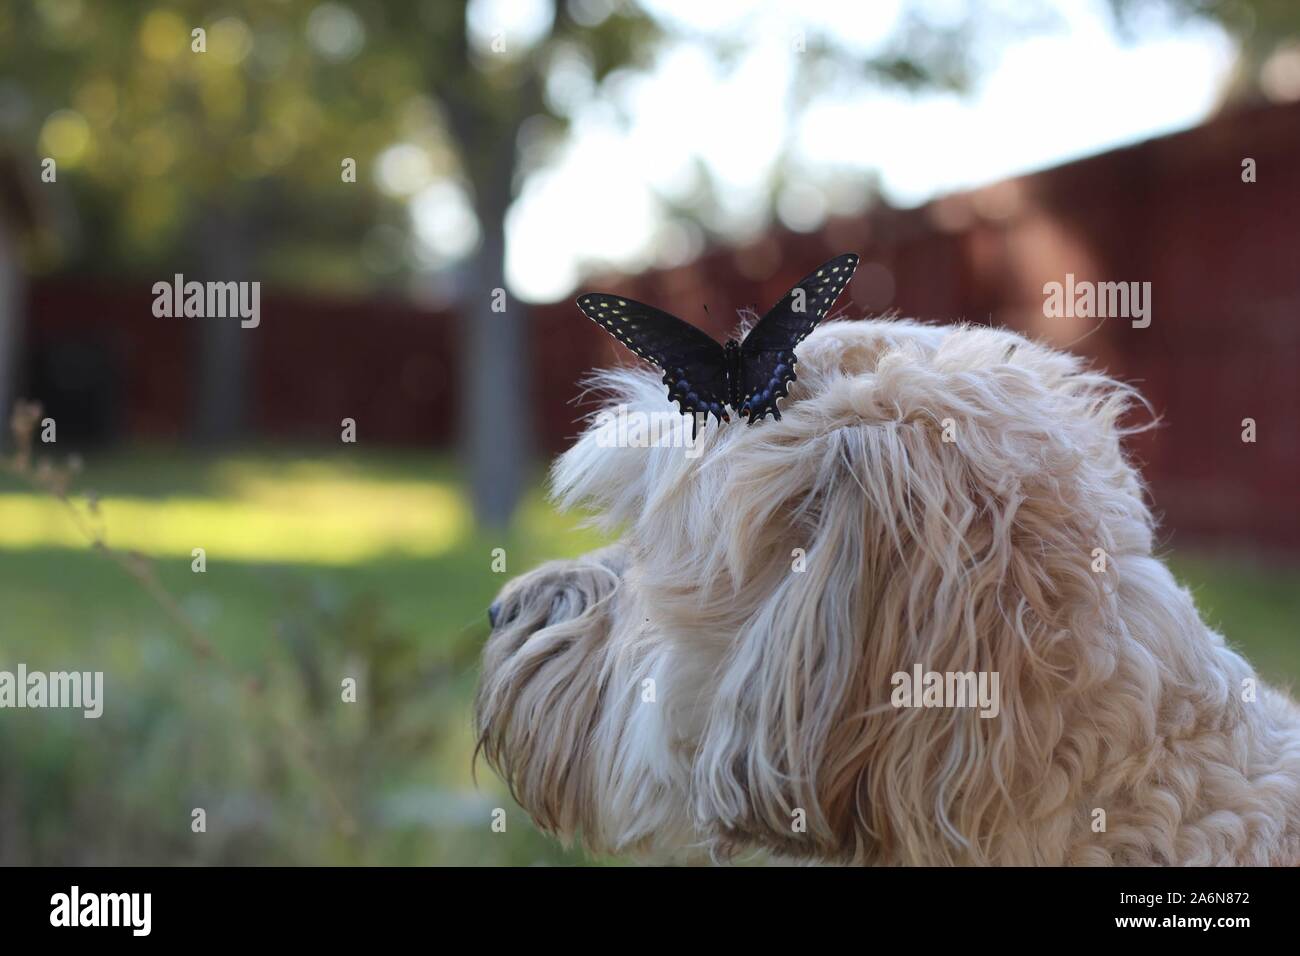 Black Swallowtail butterfly sitting on a small dogs head. Stock Photo